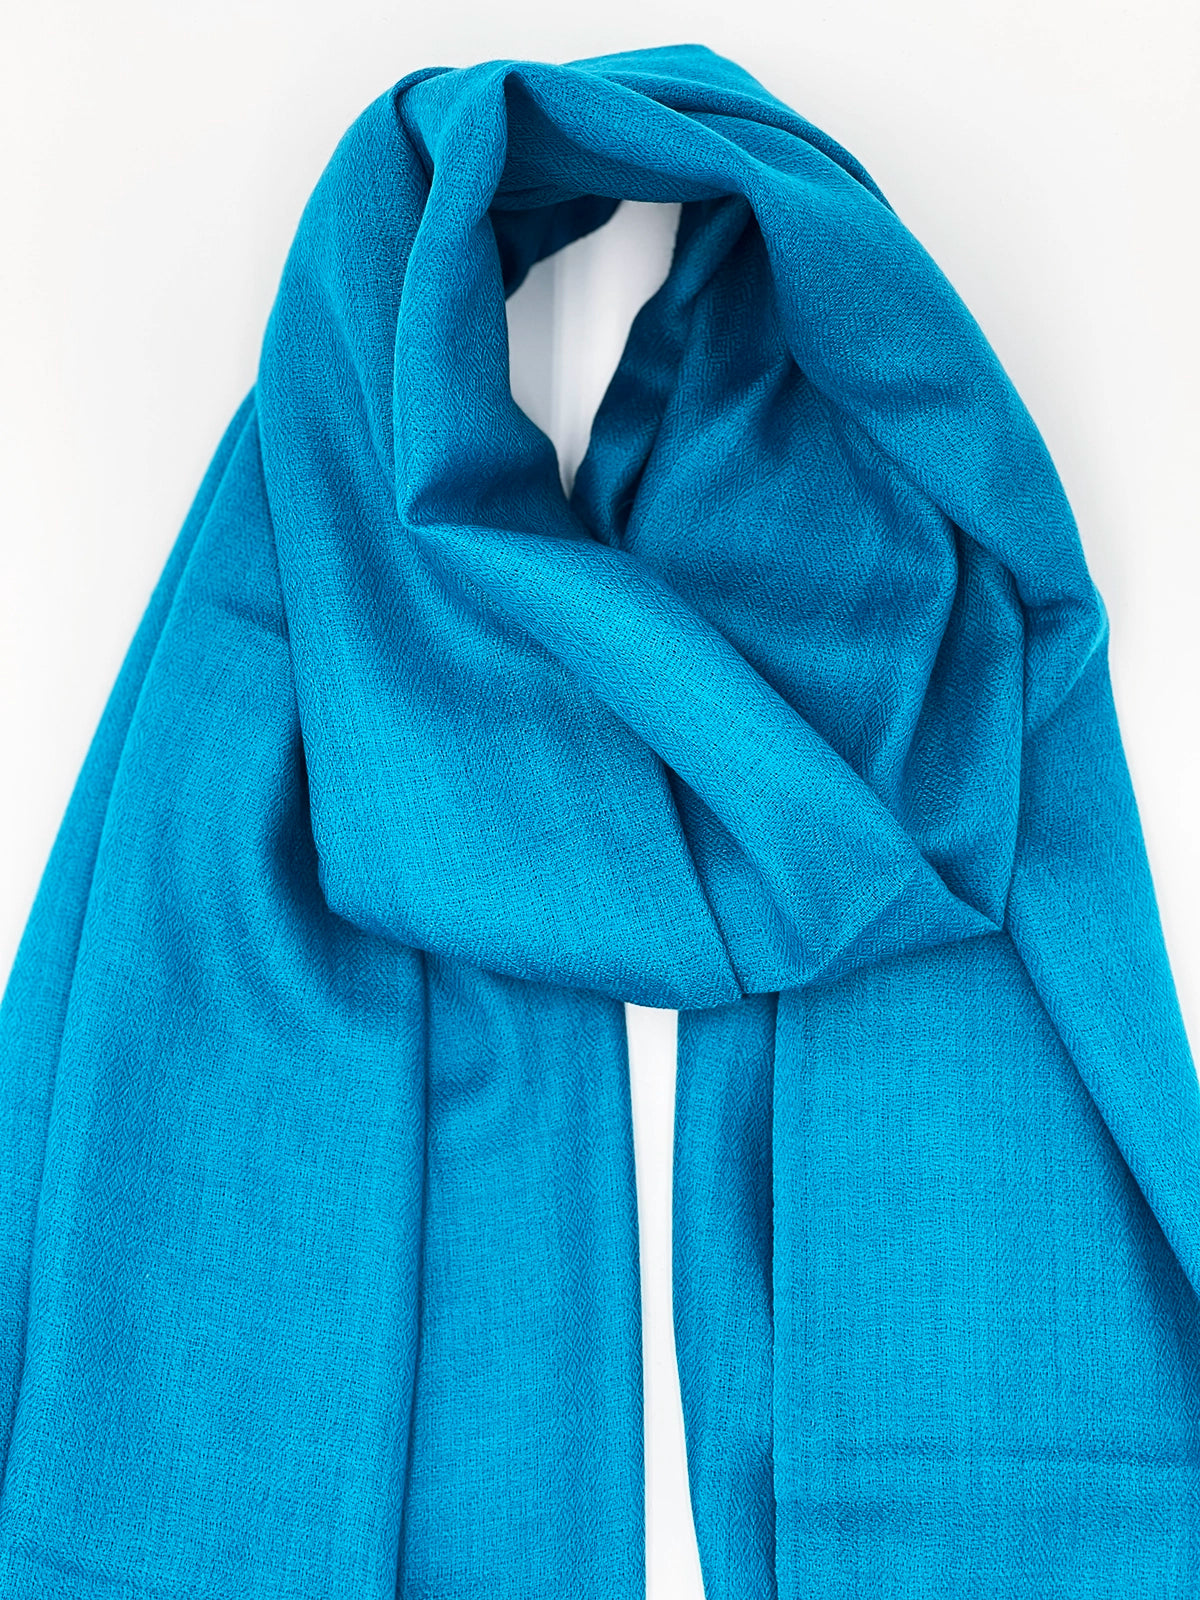 Cashmere Scarf - TEAL